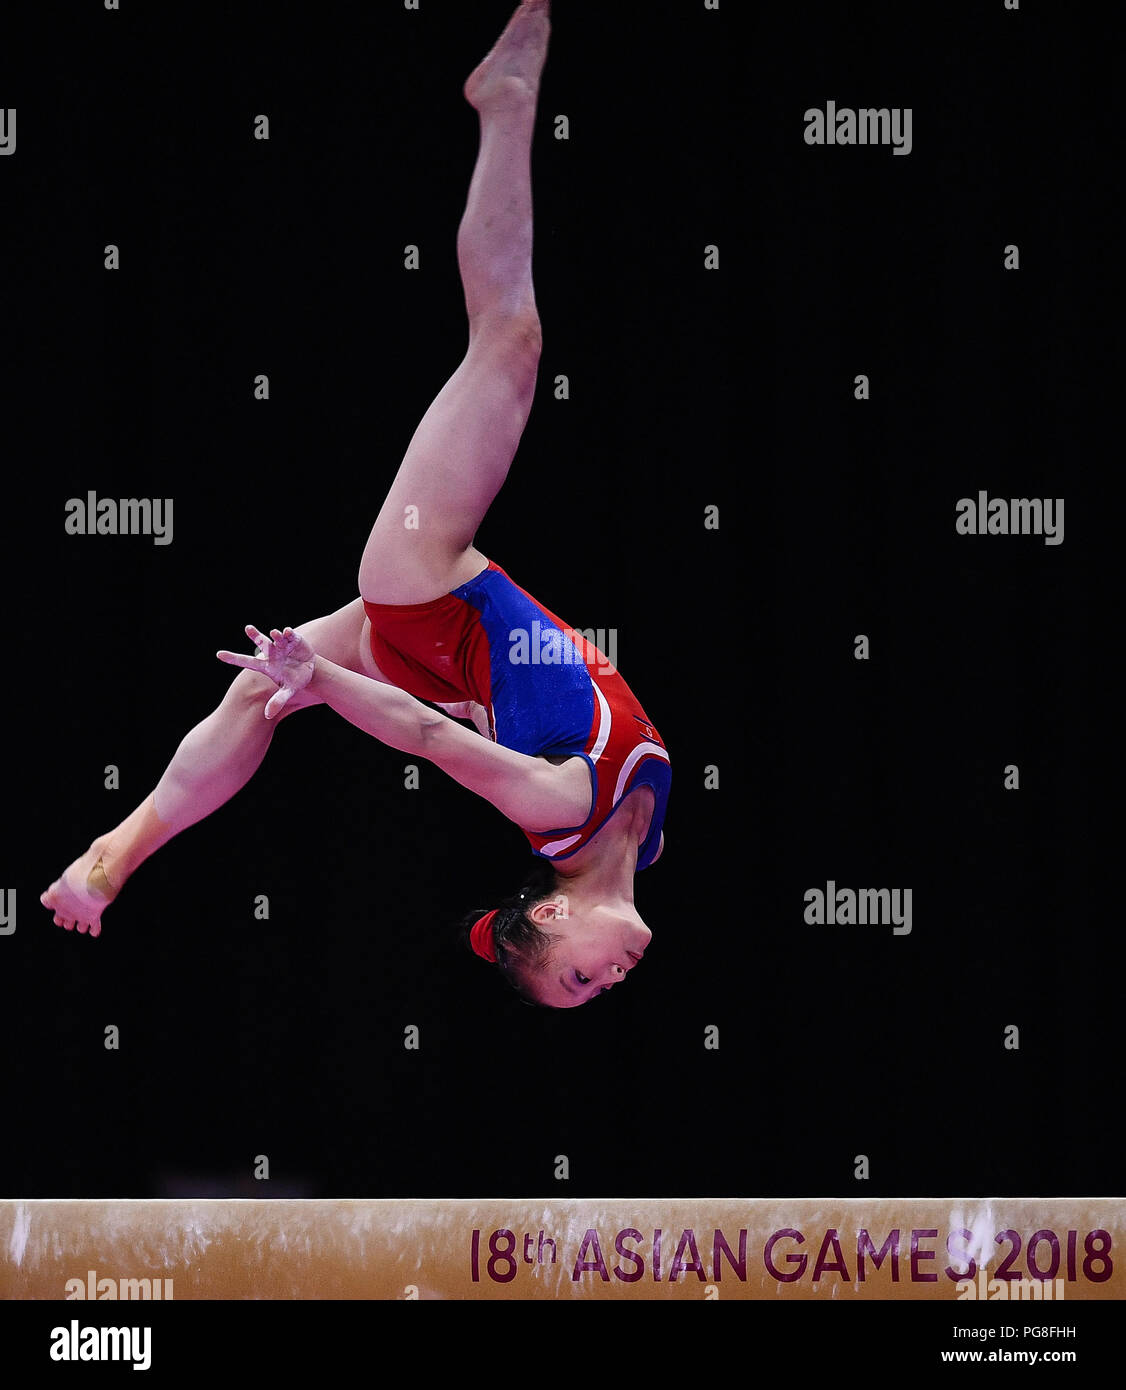 Jakarta. 24th Aug, 2018. Kim Su Jong of the Democratic People's Republic of Korea (DPRK) competes during the Artistic Gymnastics Women's Balance Beam Final at the 18th Asian Games in Jakarta, Indonesia on Aug. 24, 2018. Credit: Li Xiang/Xinhua/Alamy Live News Stock Photo